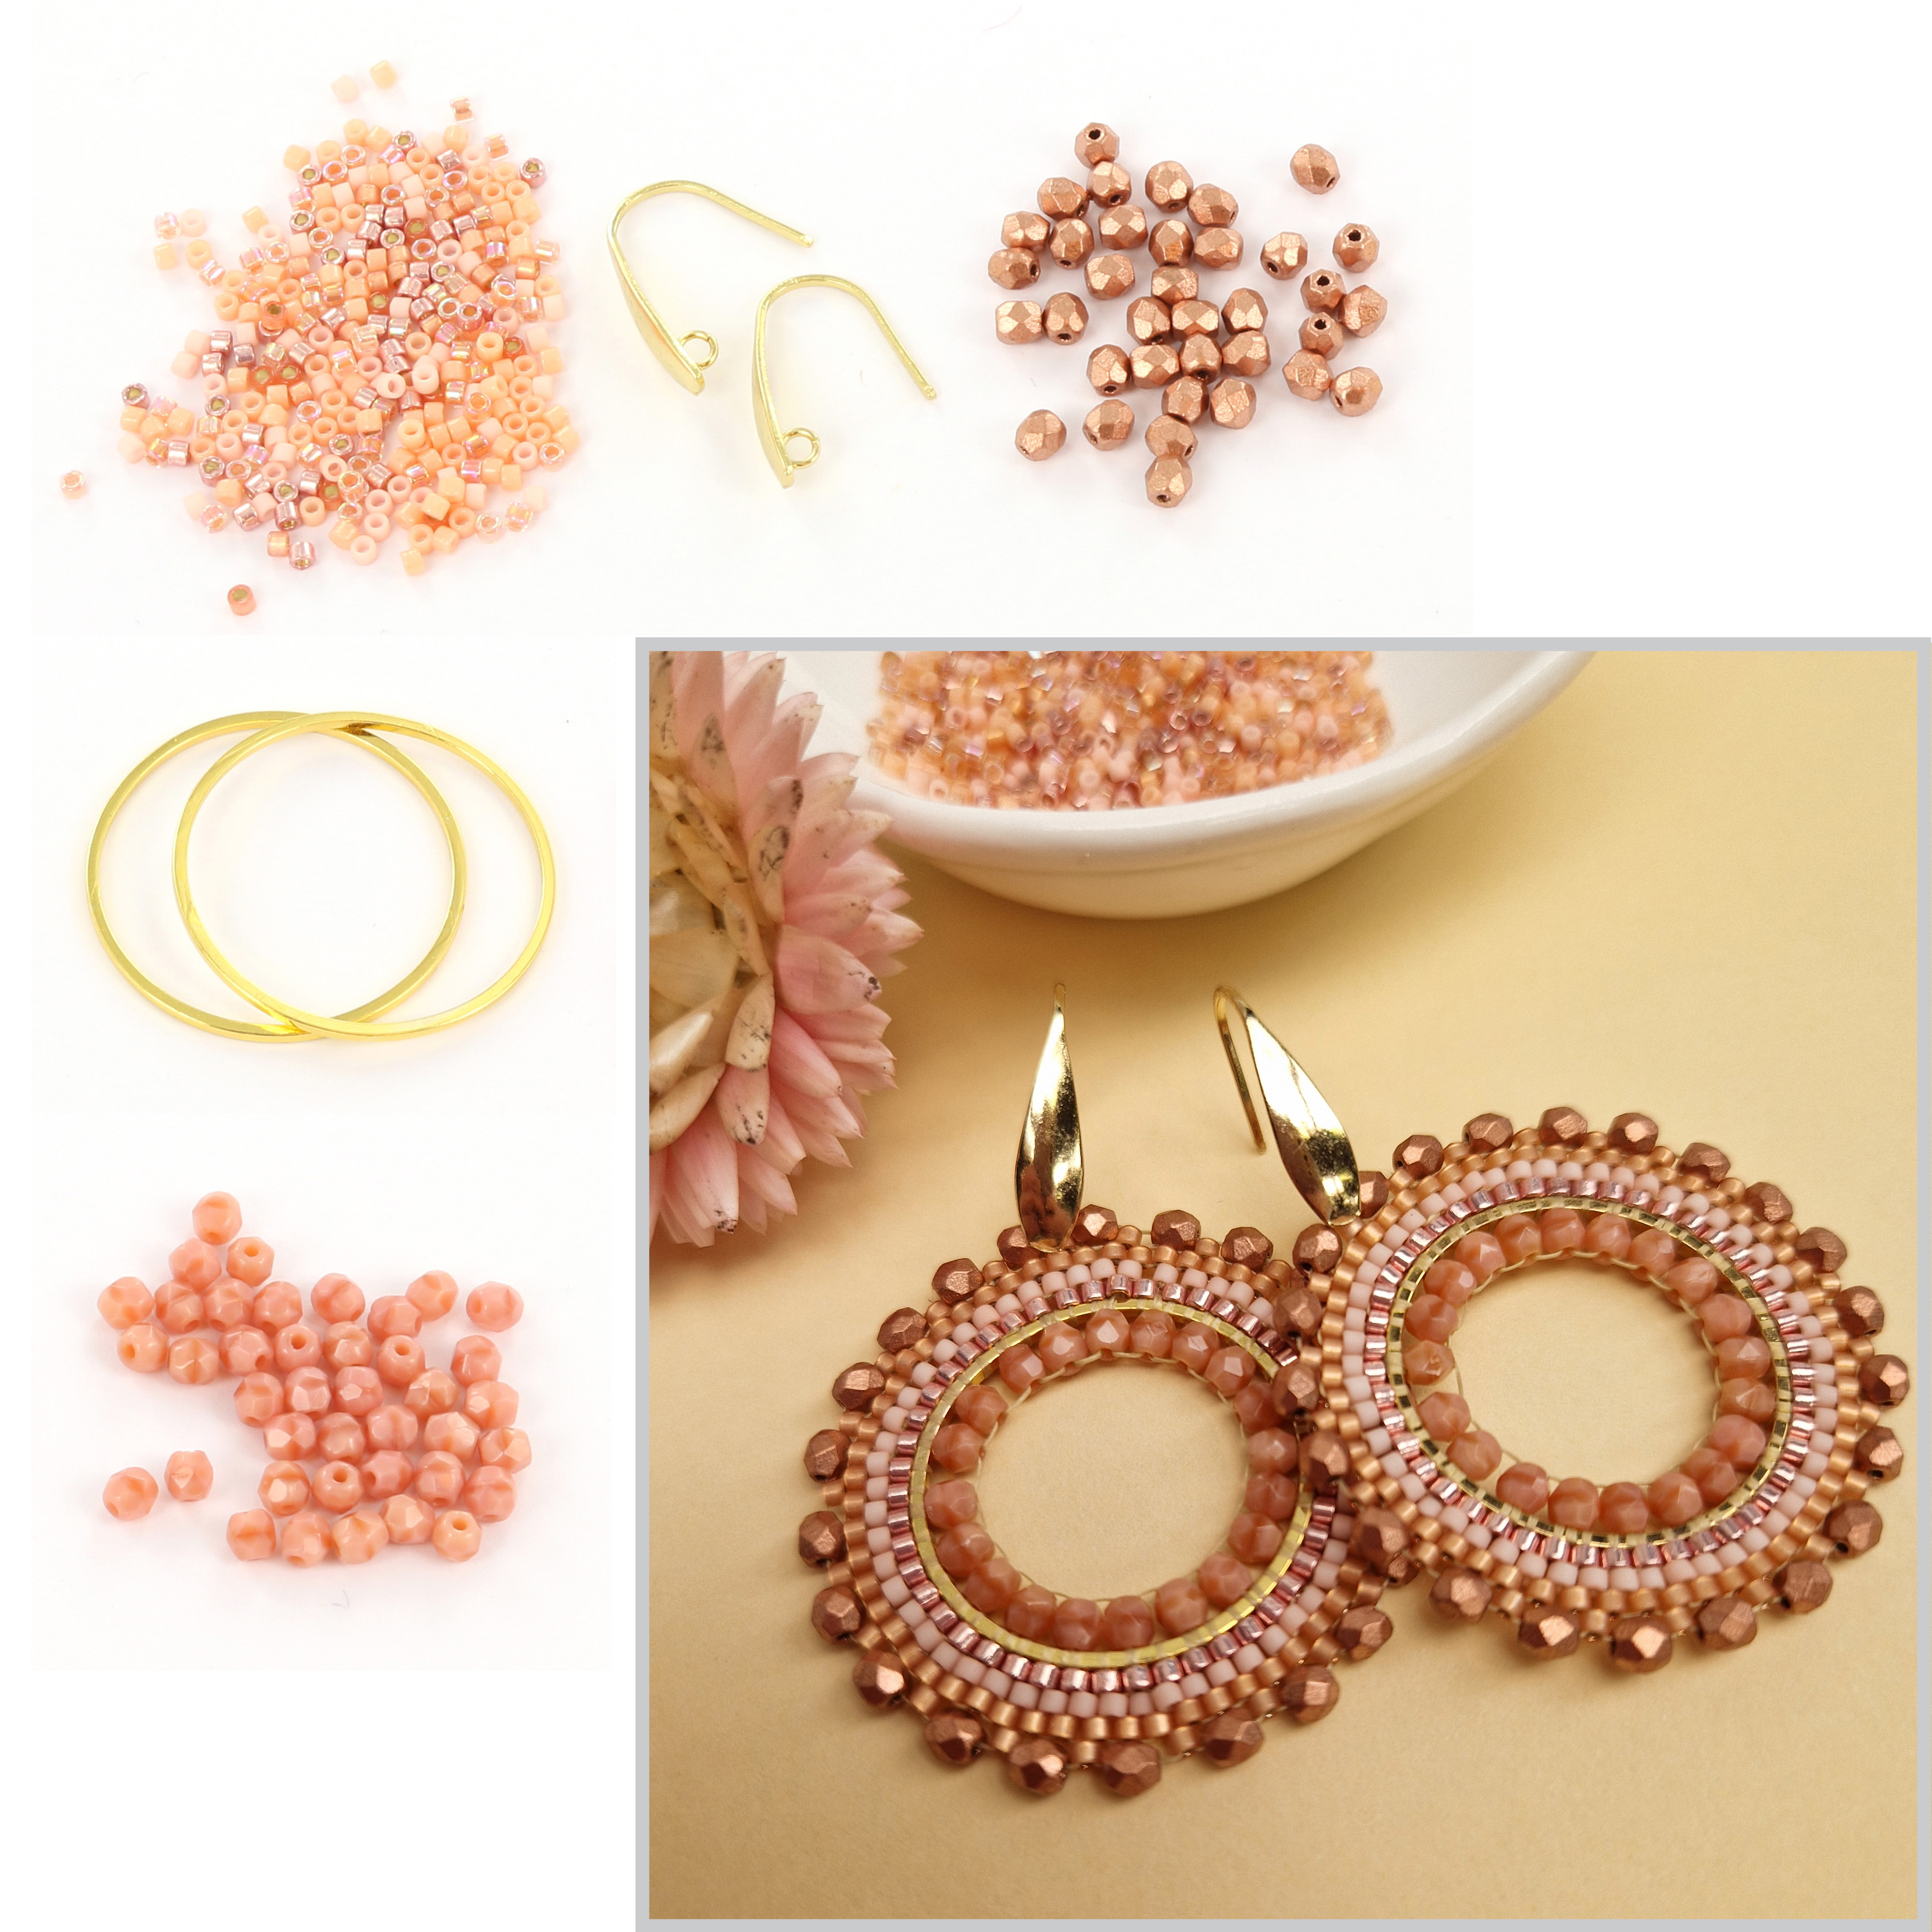 Extra pictures DIY kit round earrings - blush pink and gold